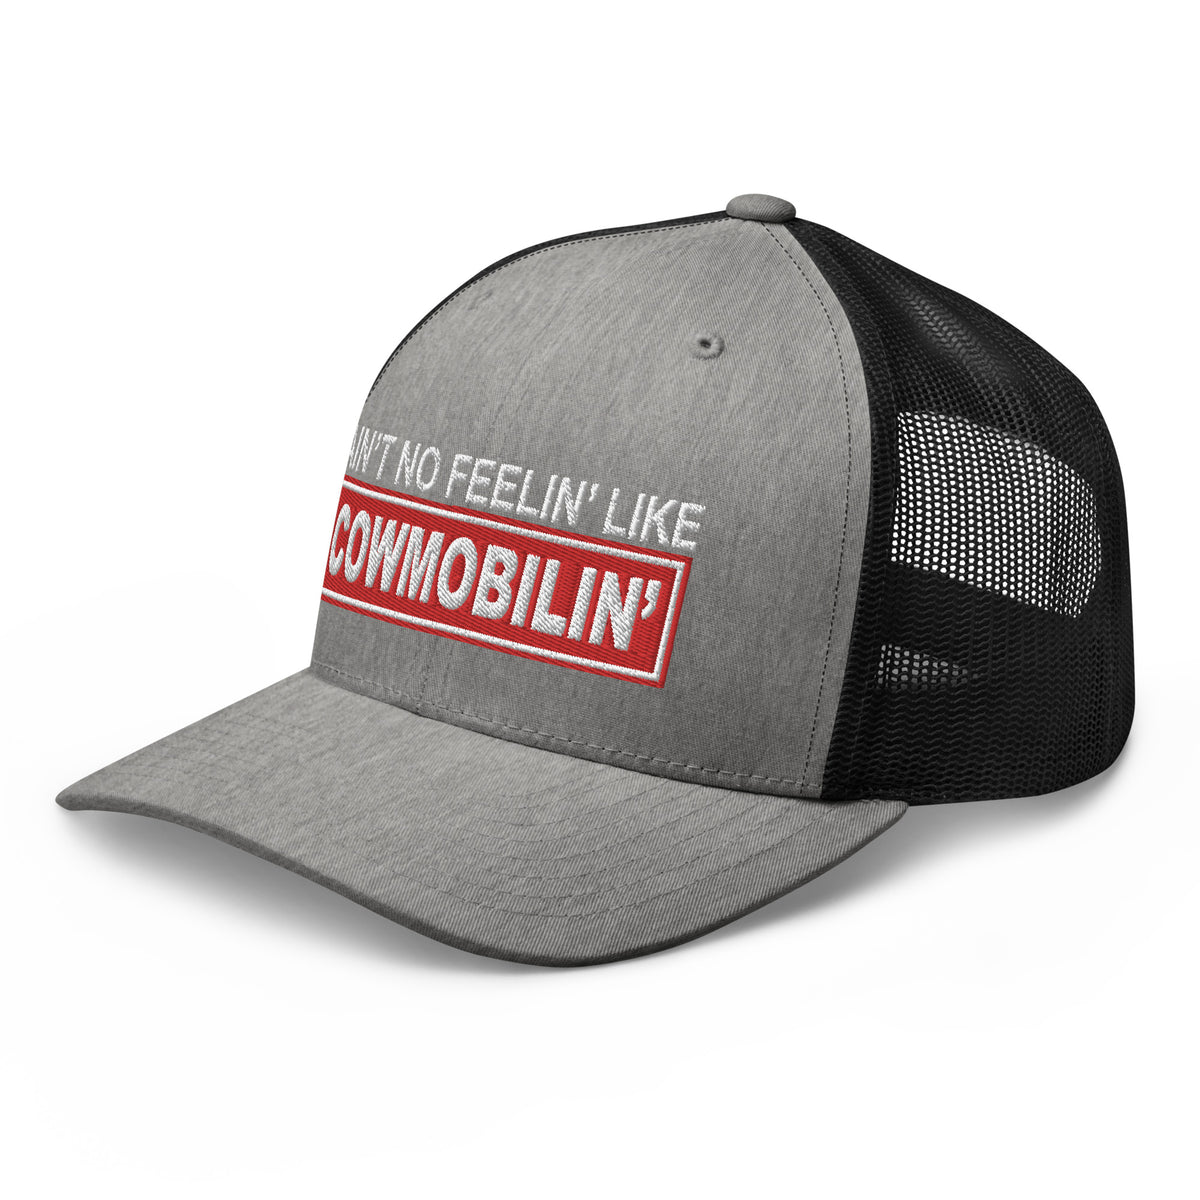 Ain't No Feelin' Like Cowmobilin' - Embroidered Hat - Free Shipping